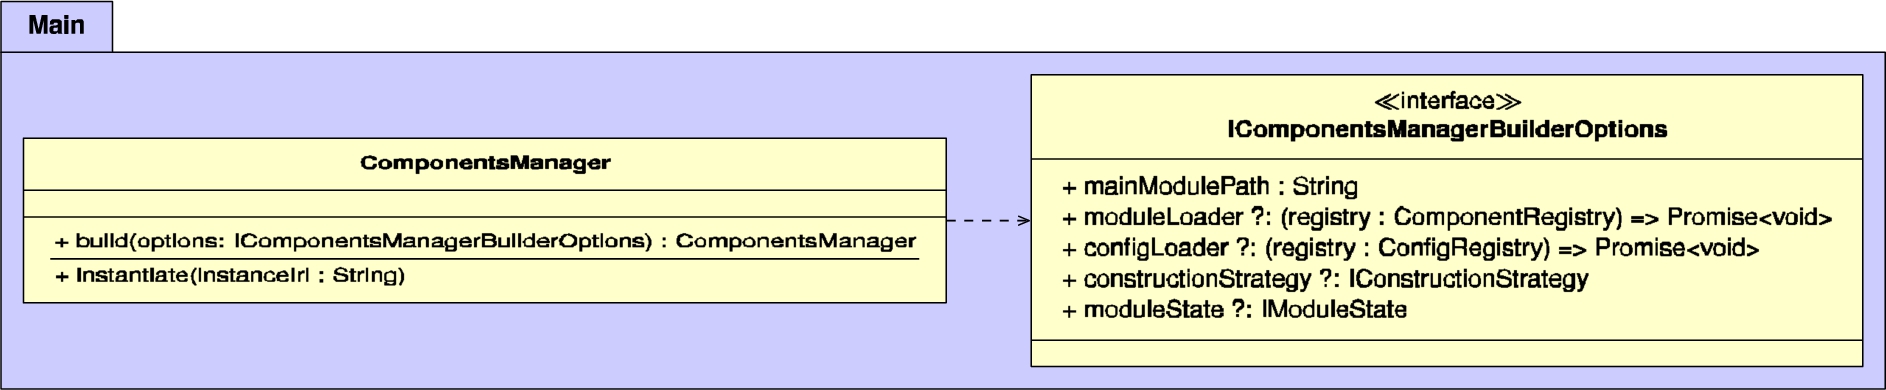 UML diagram of the classes within the main package, which contains the main entrypoint of the framework.